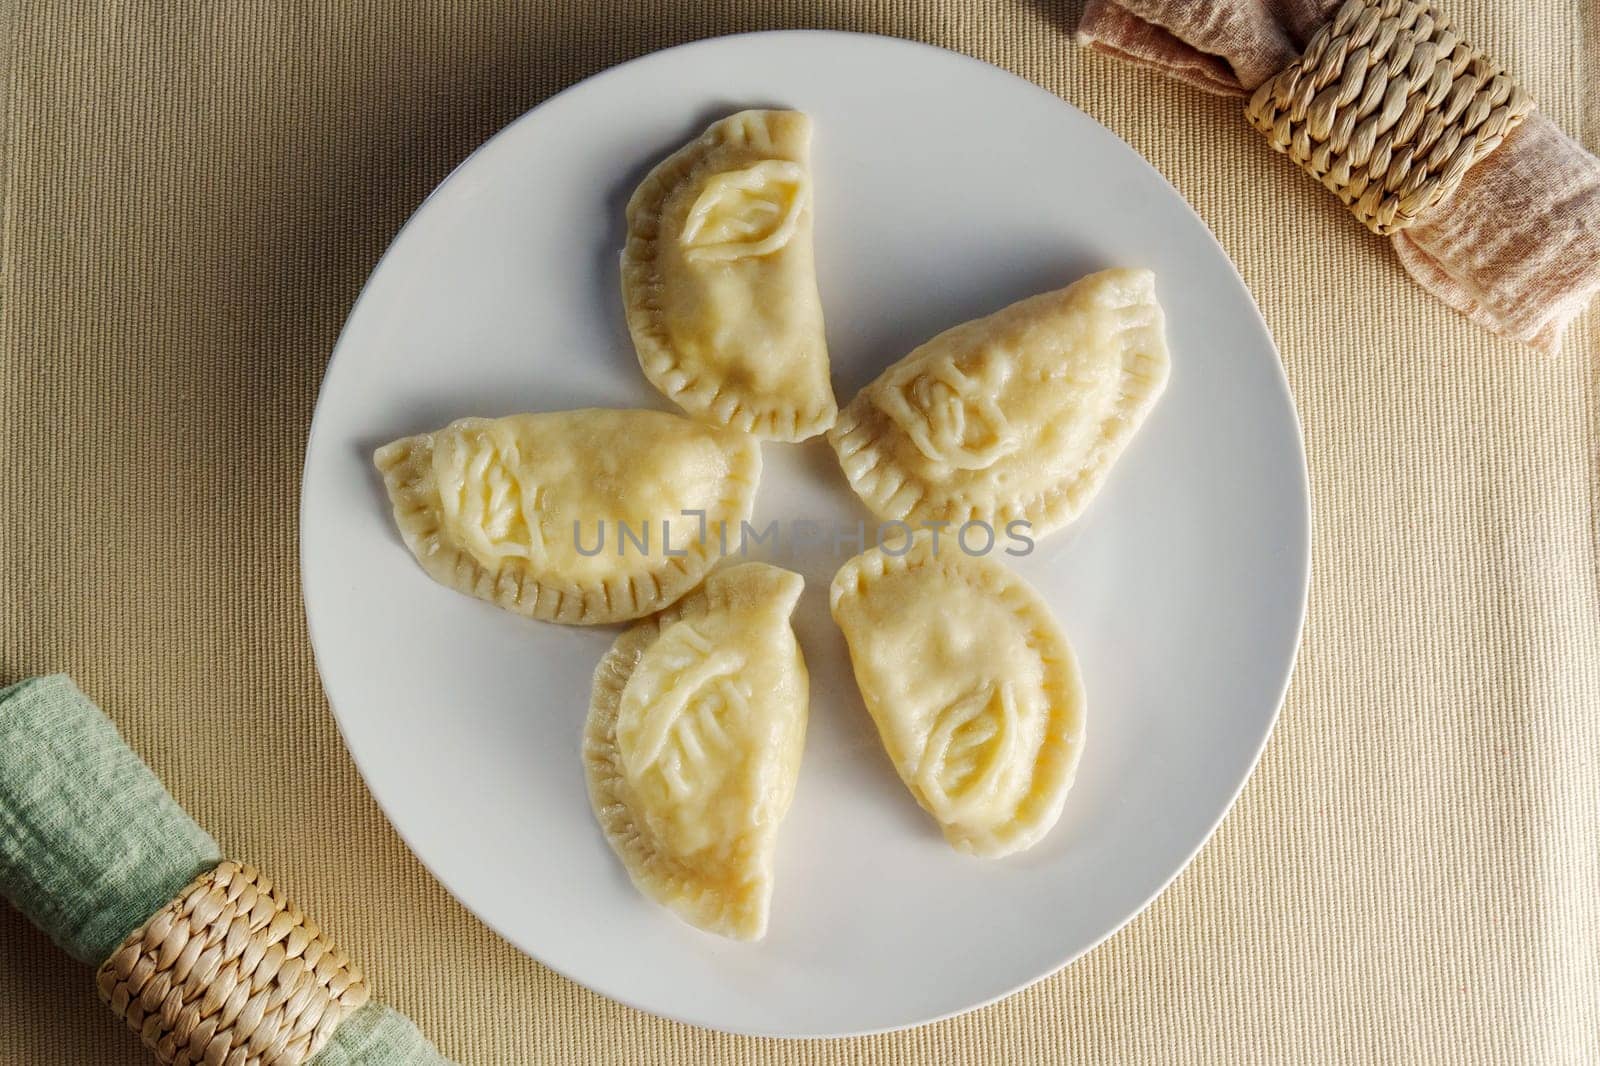 Elegance of perfectly crimped crescent dumplings, or ravioli, presented on a white plate, ready to entice any food connoisseur. by darksoul72